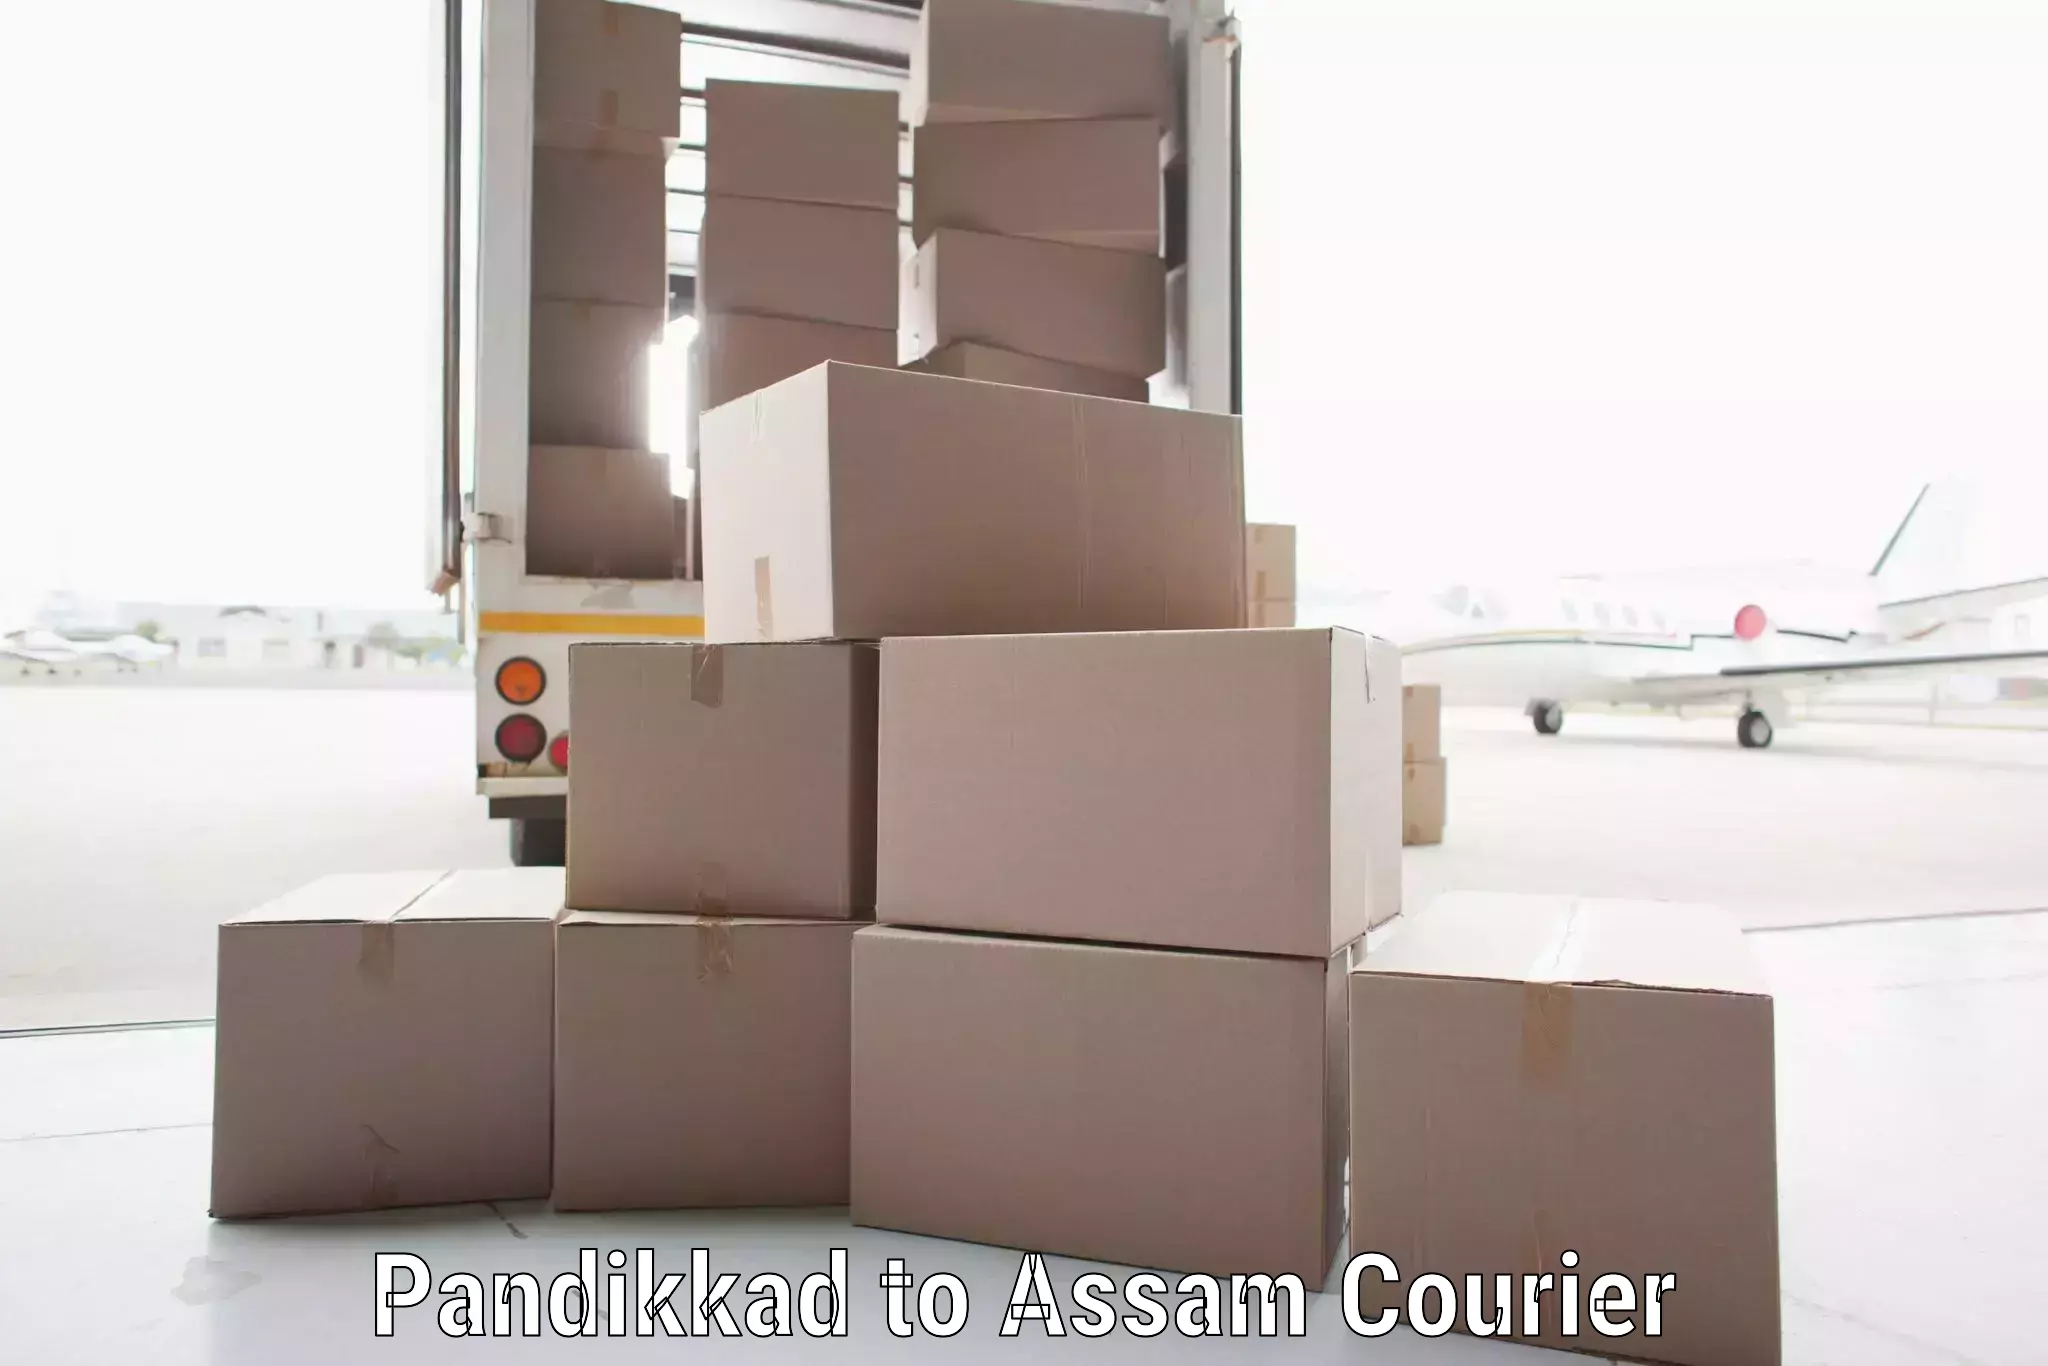 Nationwide shipping services in Pandikkad to Jorhat